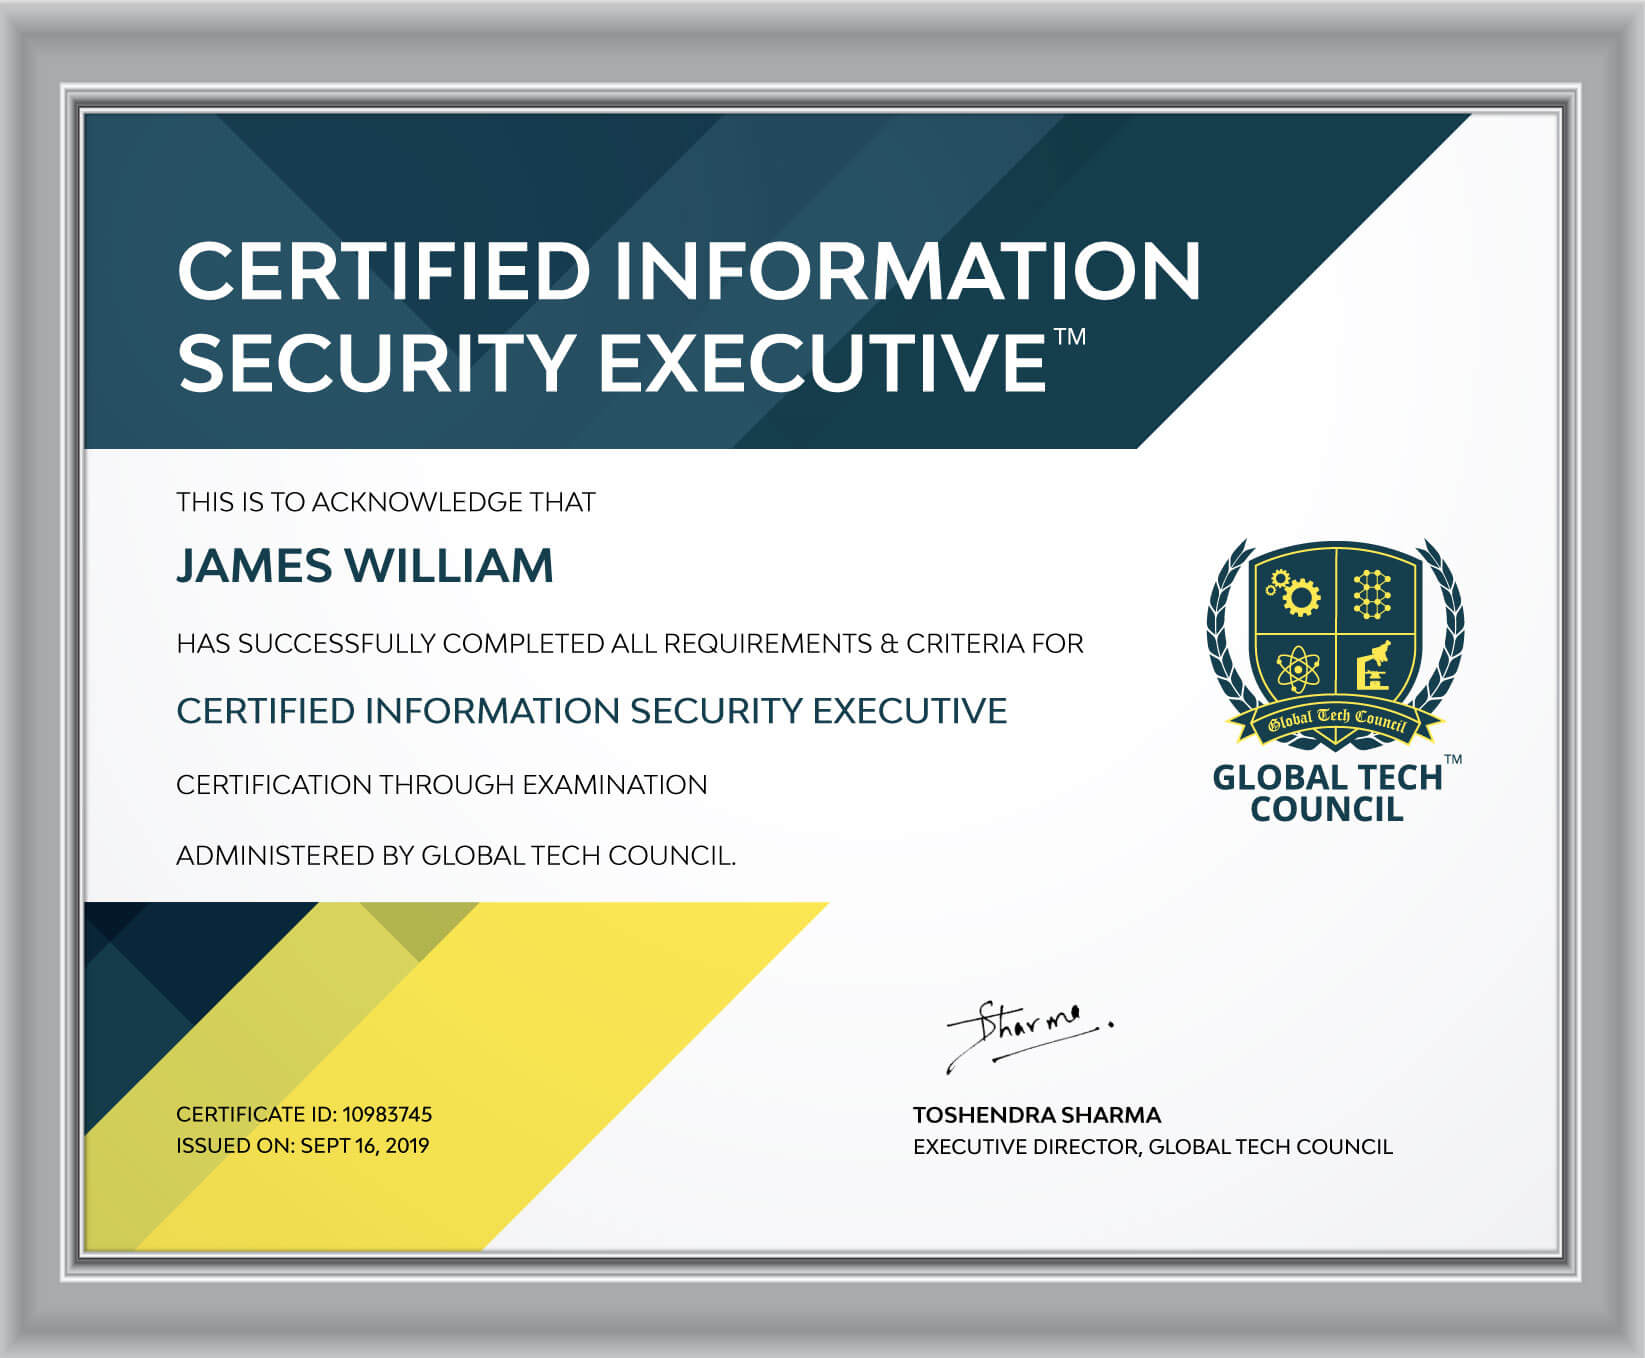 information security certifications, information security training, best information security certifications